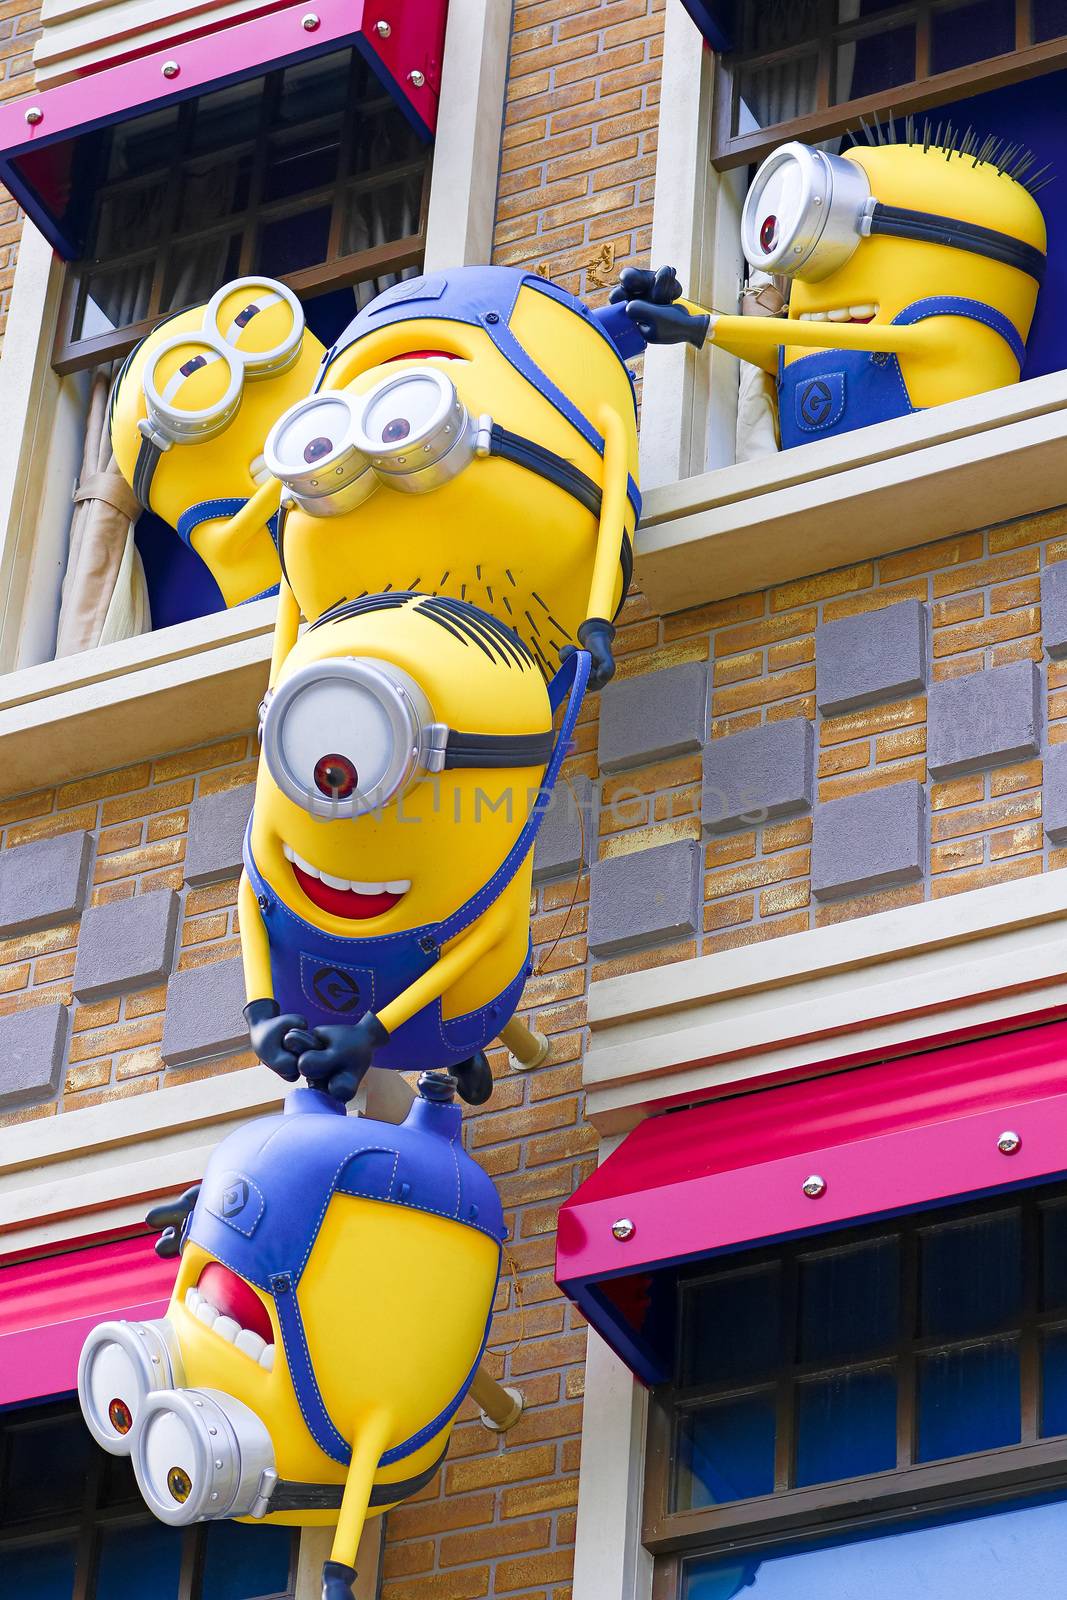 SAKA, JAPAN - June 24, 2017 : Statue of "HAPPY MINION", located in Universal Studios Japan, Osaka, Japan. Minions are famous character from Despicable Me animation.